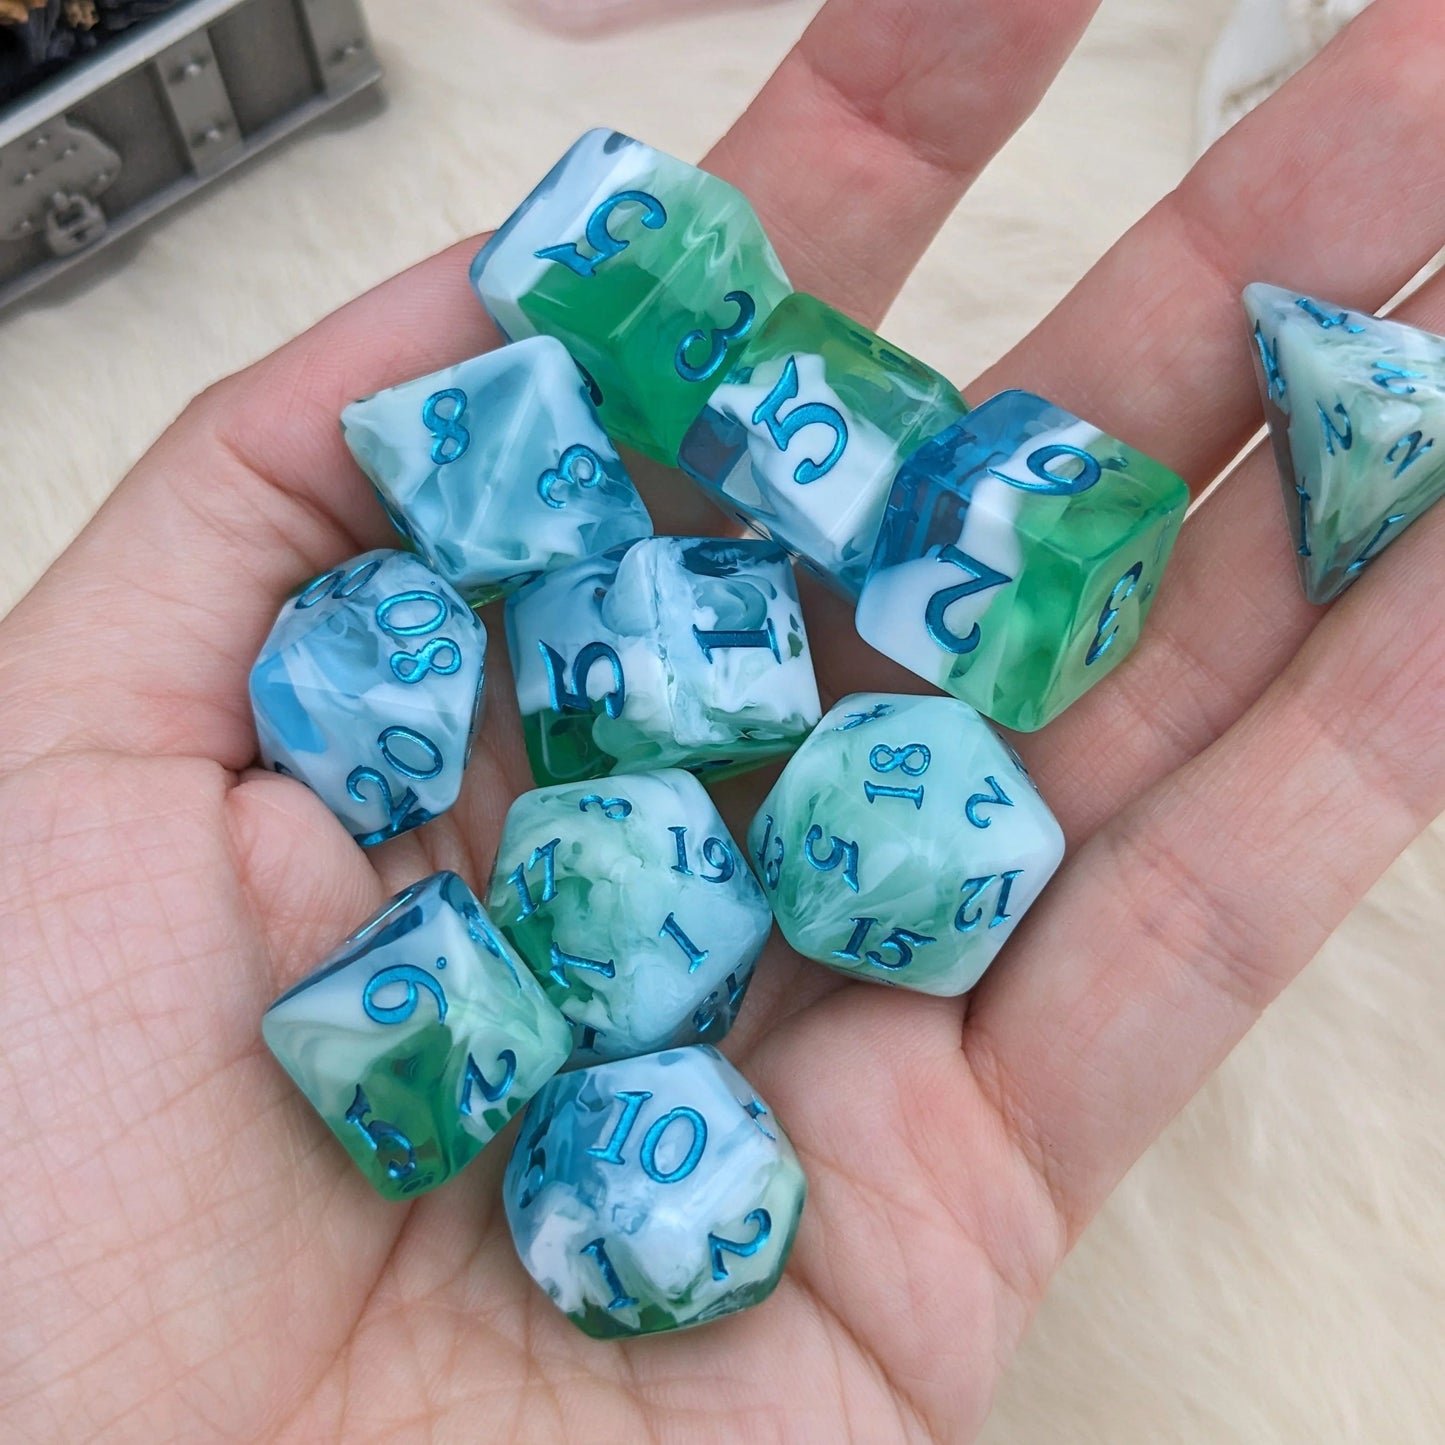 Tidecaller - 7 Dice Set - The Fourth Place